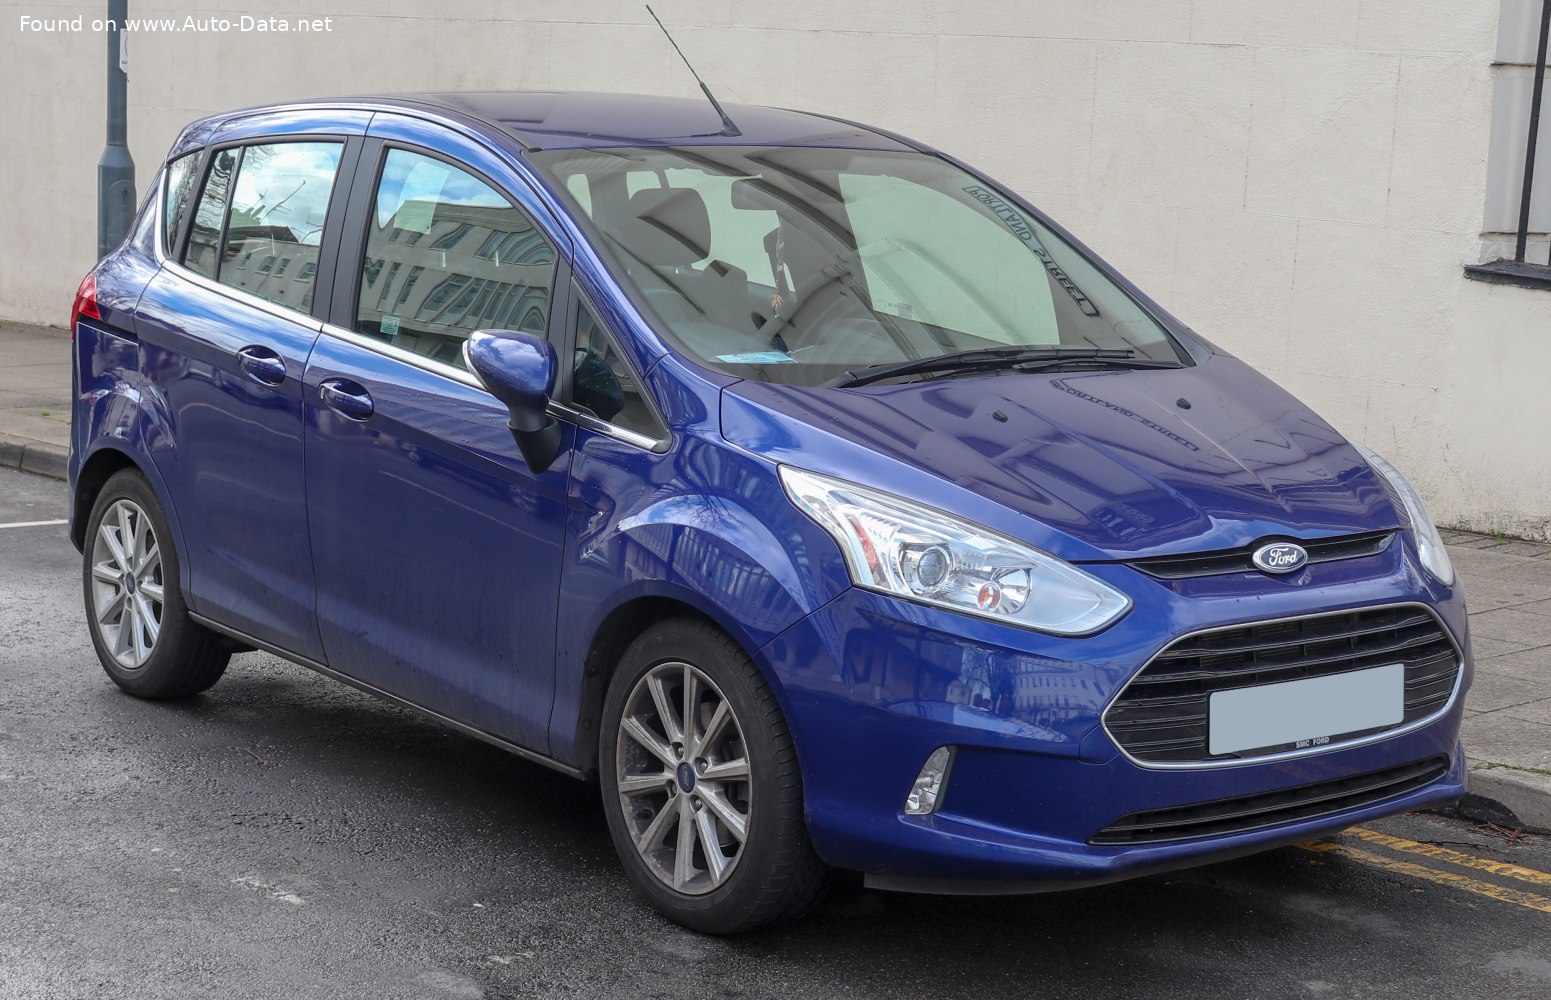 12 Ford B Max 1 0 Ecoboost 100 Hp Technical Specs Data Fuel Consumption Dimensions